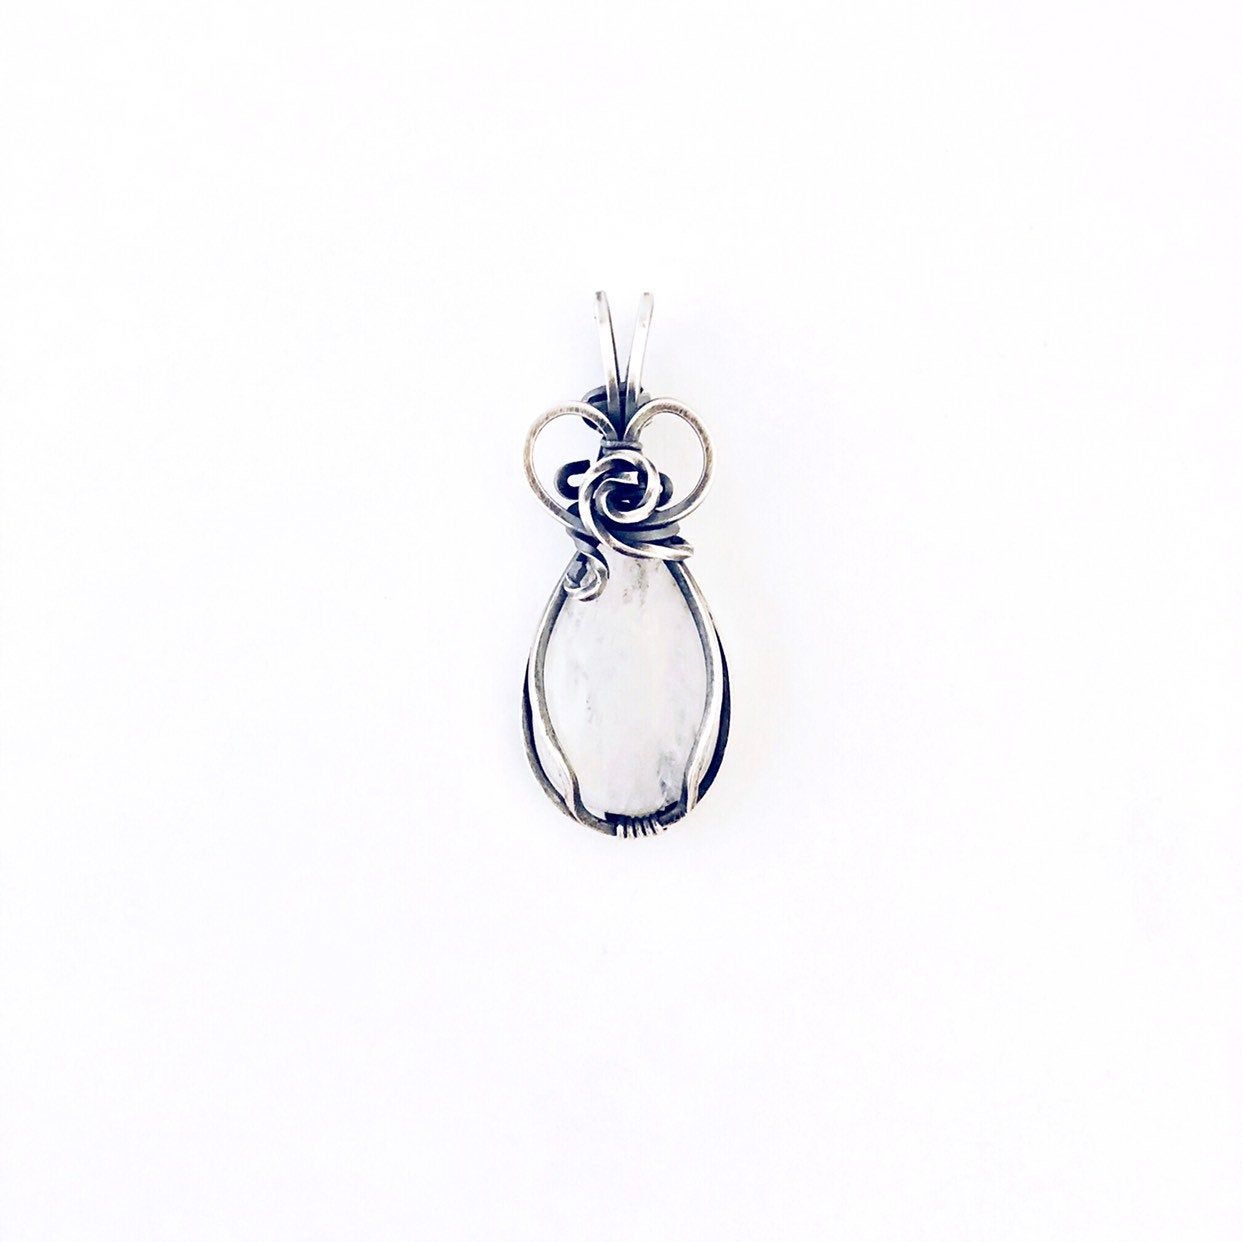 Rainbow Moonstone Sterling Silver Wire Wrapped Pendant Necklace In Recent Grey Moonstone June Droplet Pendant Necklaces (View 13 of 25)